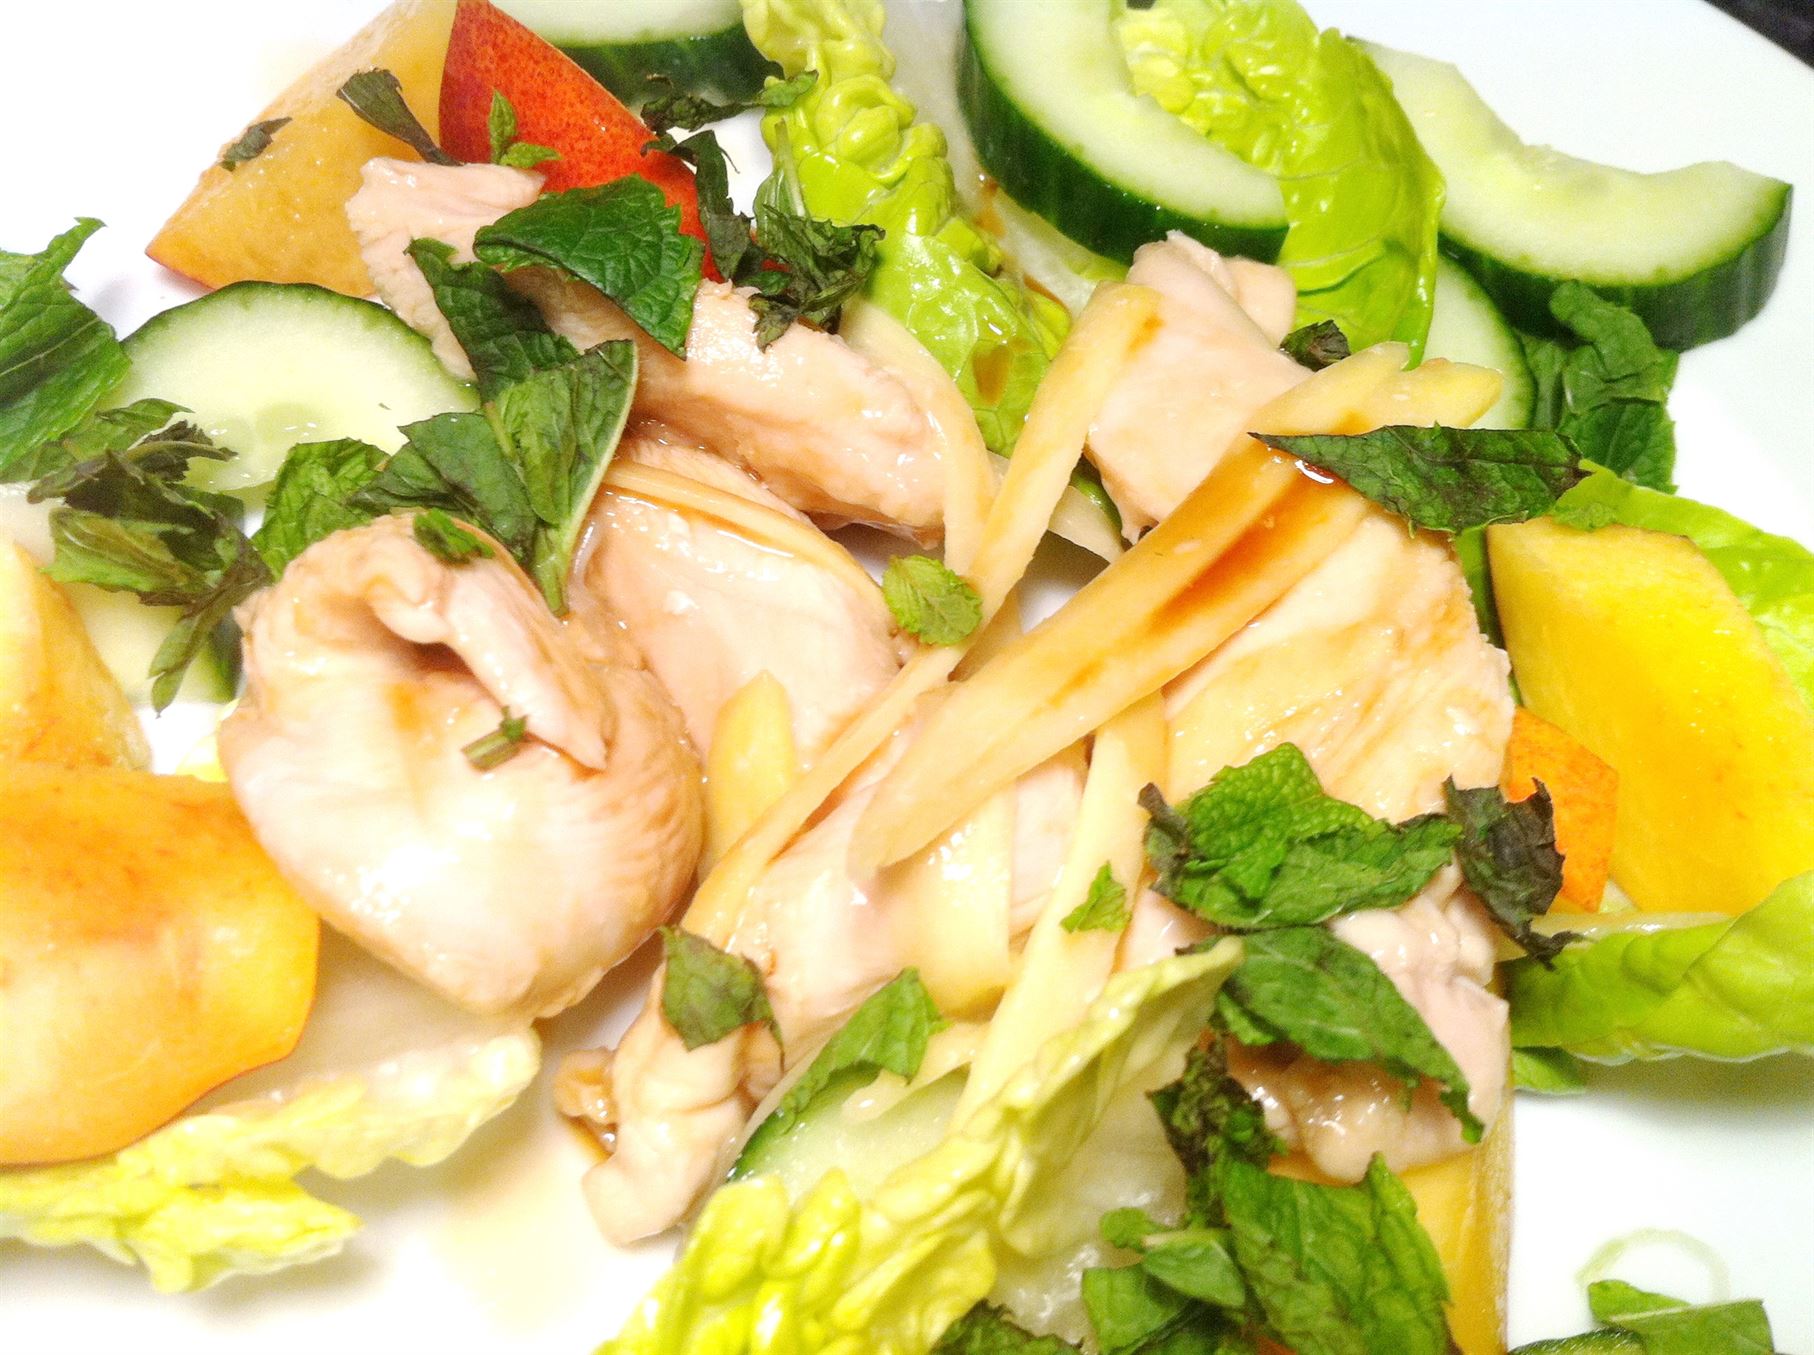 Steam-Poached Ginger Chicken with Baby Gem, Nectarine and Mint Salad, Lay The Table